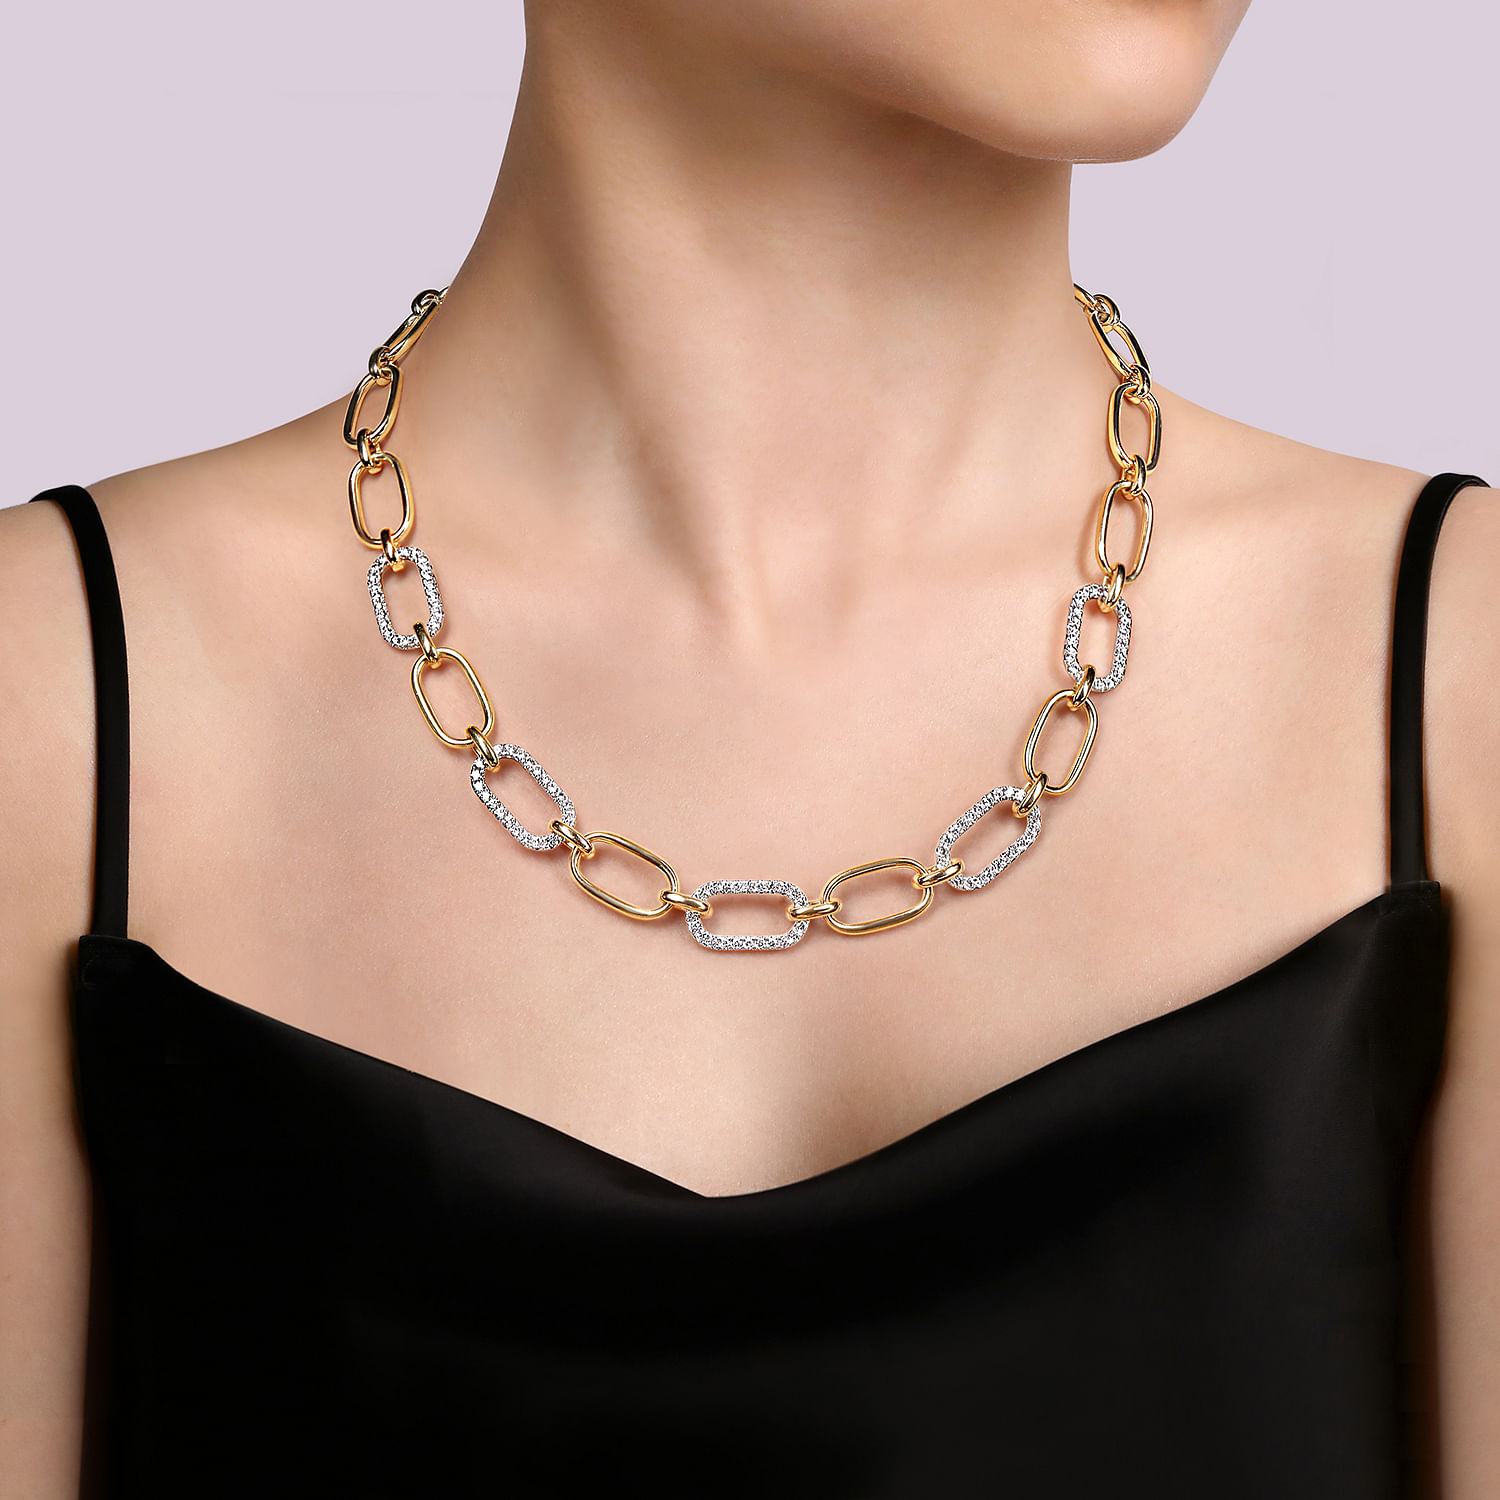 14K Yellow-White Chain Necklace with Diamond Link Stations